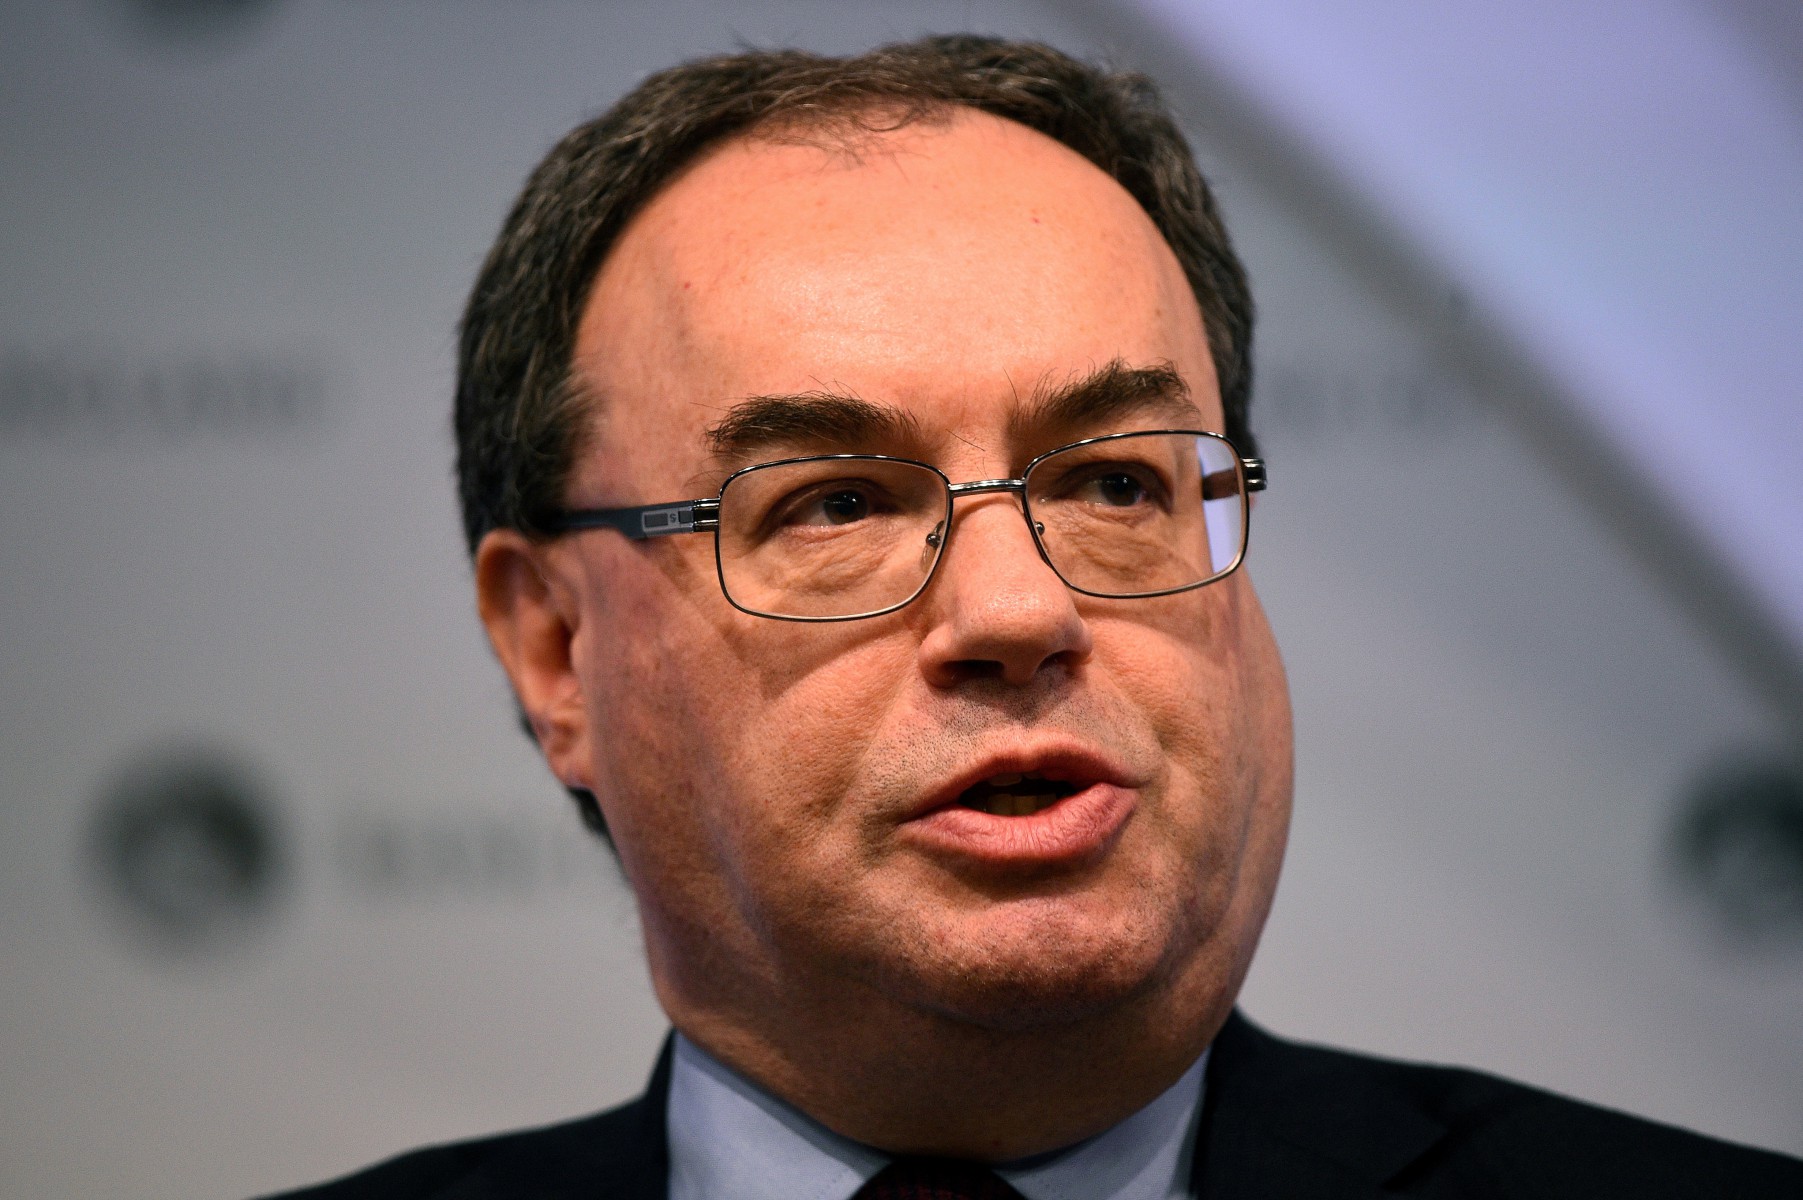 Andrew Bailey will takeover as the new Bank of England governor in March